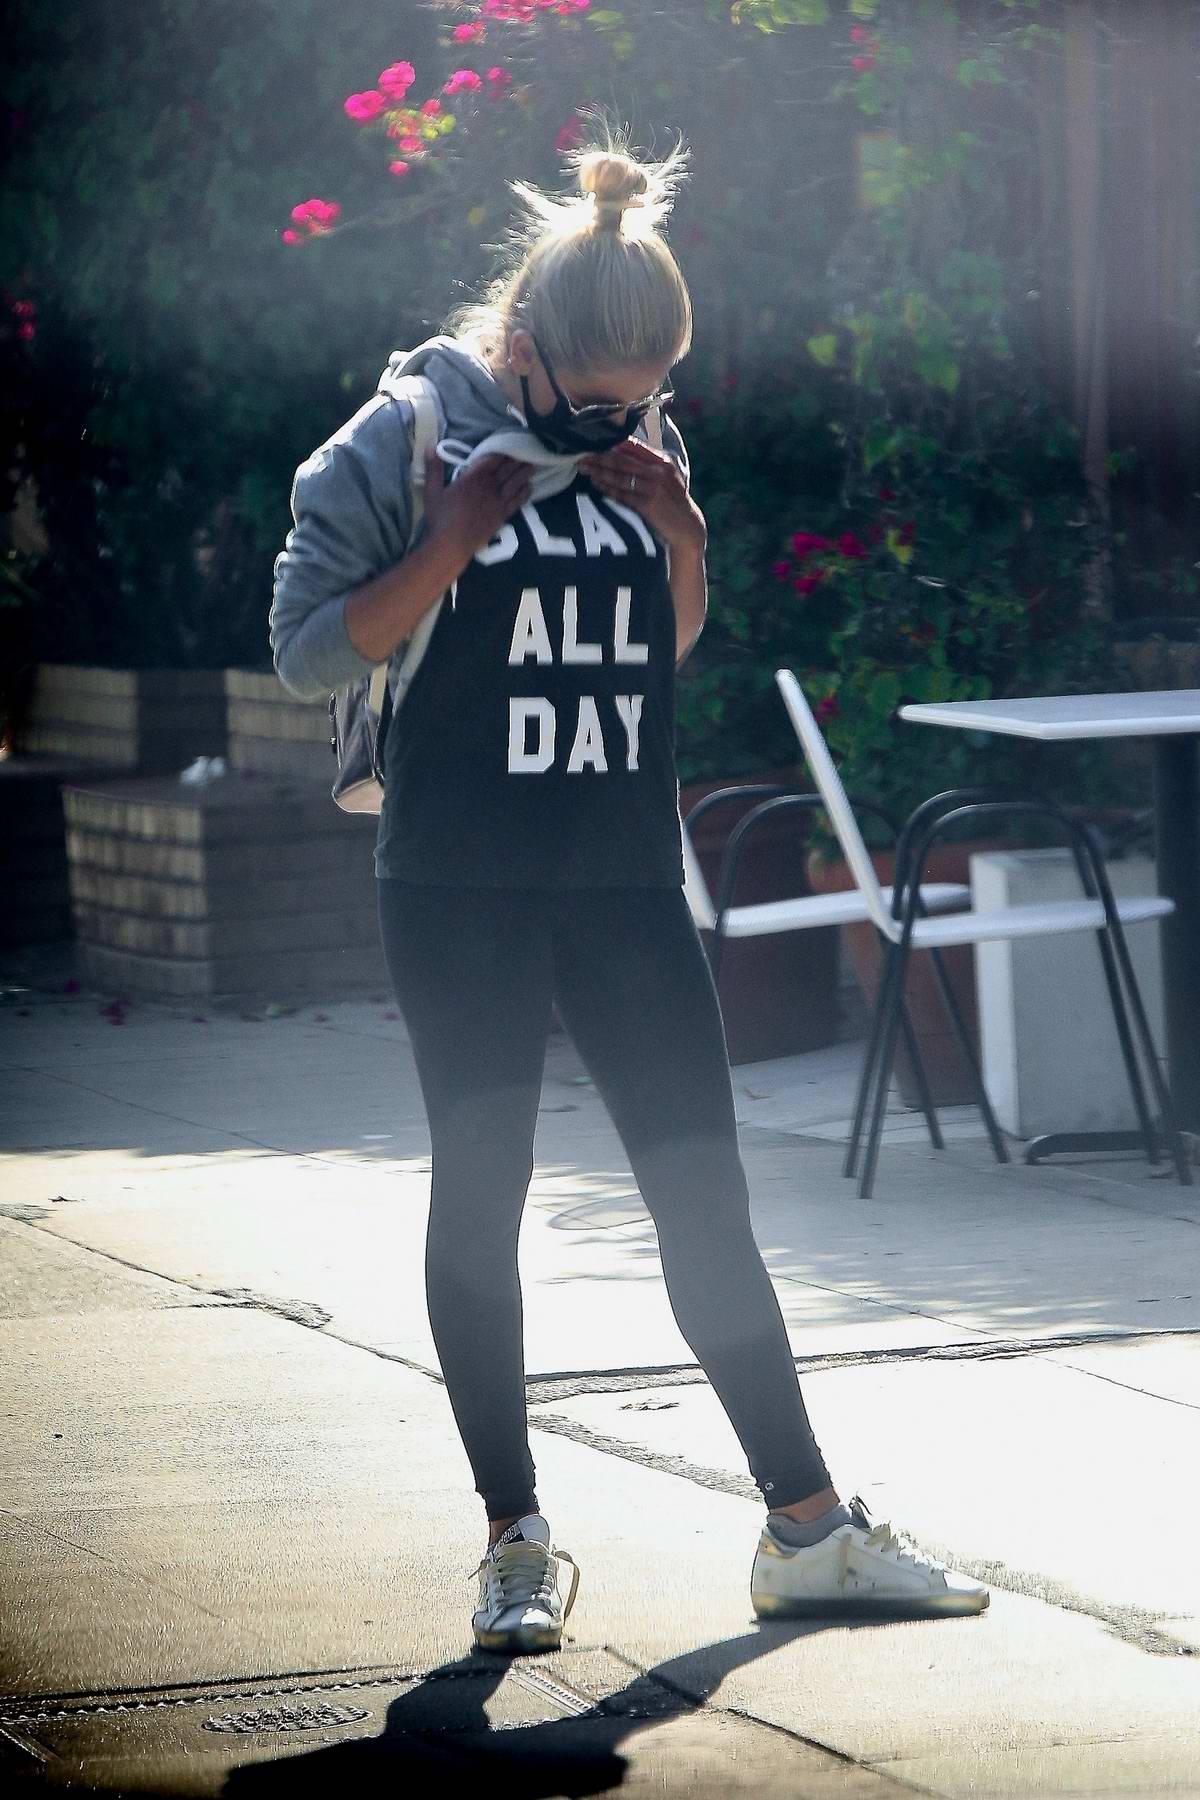 Sarah Michelle Gellar Shows Her Slay All Day Top To A Friend While Out For Coffee In Los Angeles